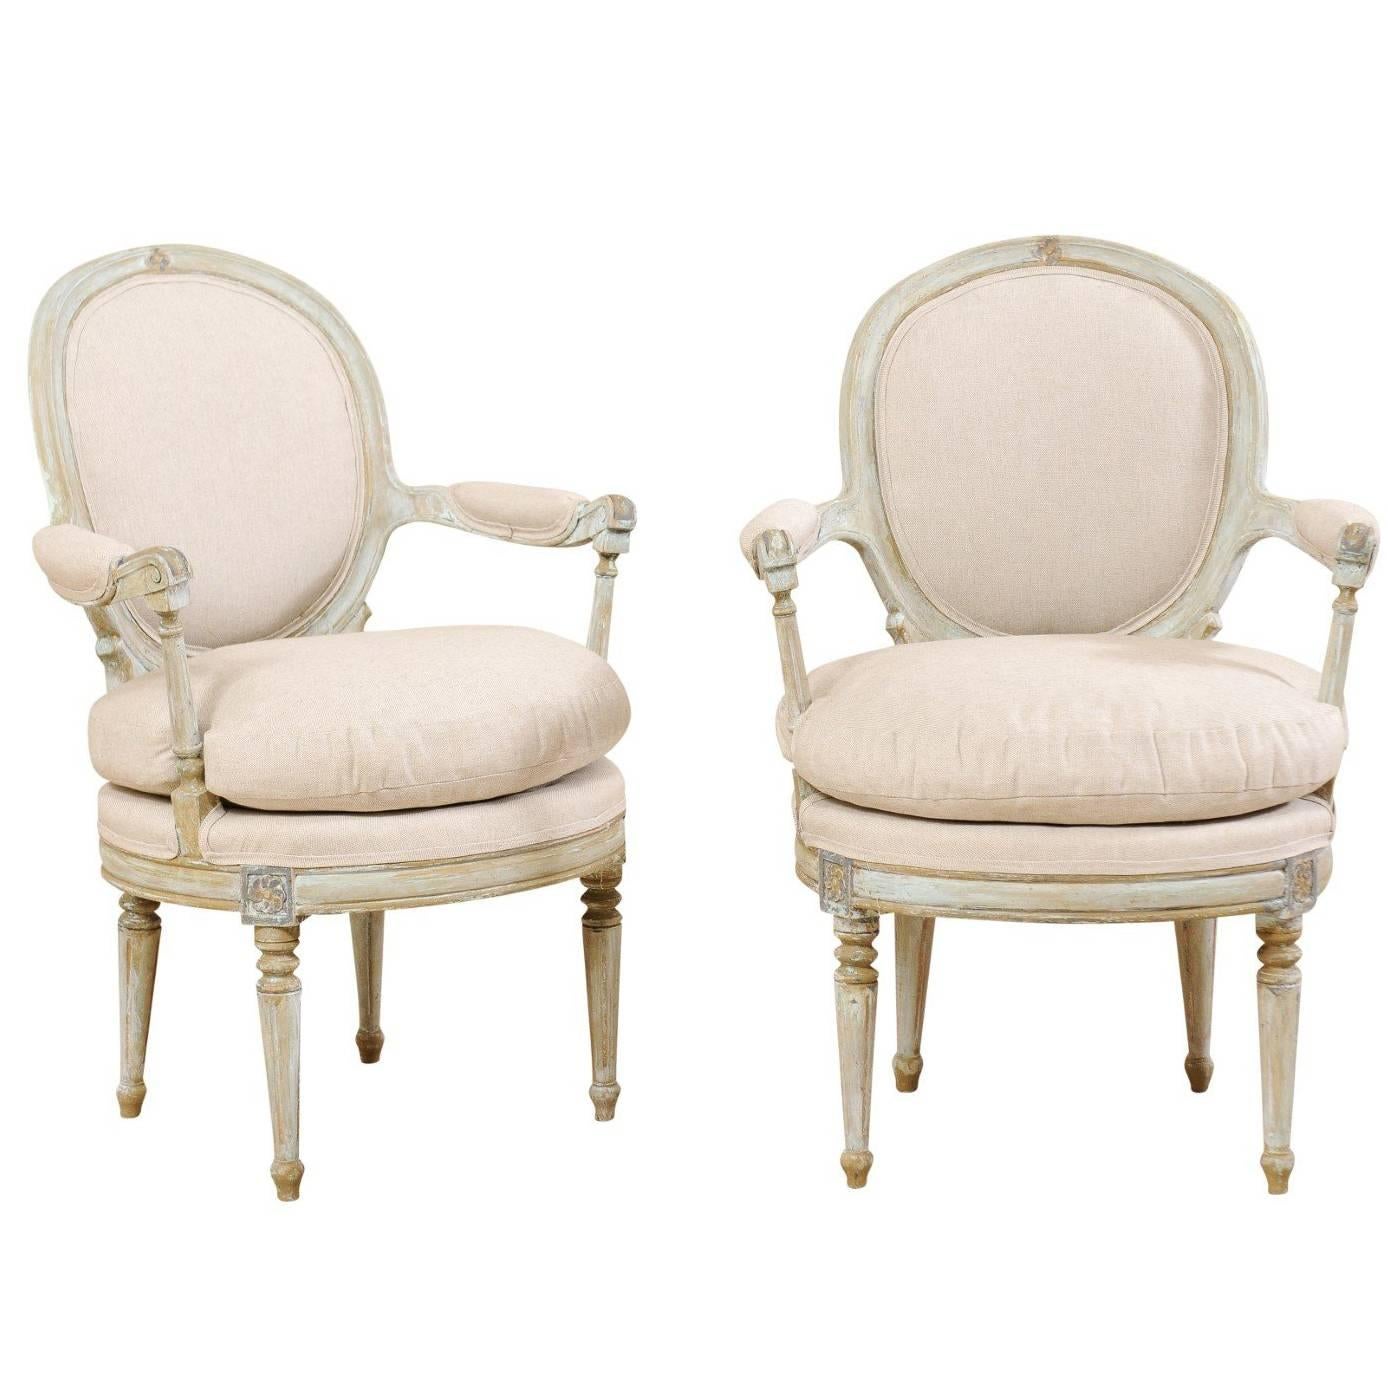 Pair of French Oval-Back Bergère Chairs with Delicately Carved Floral Motifs